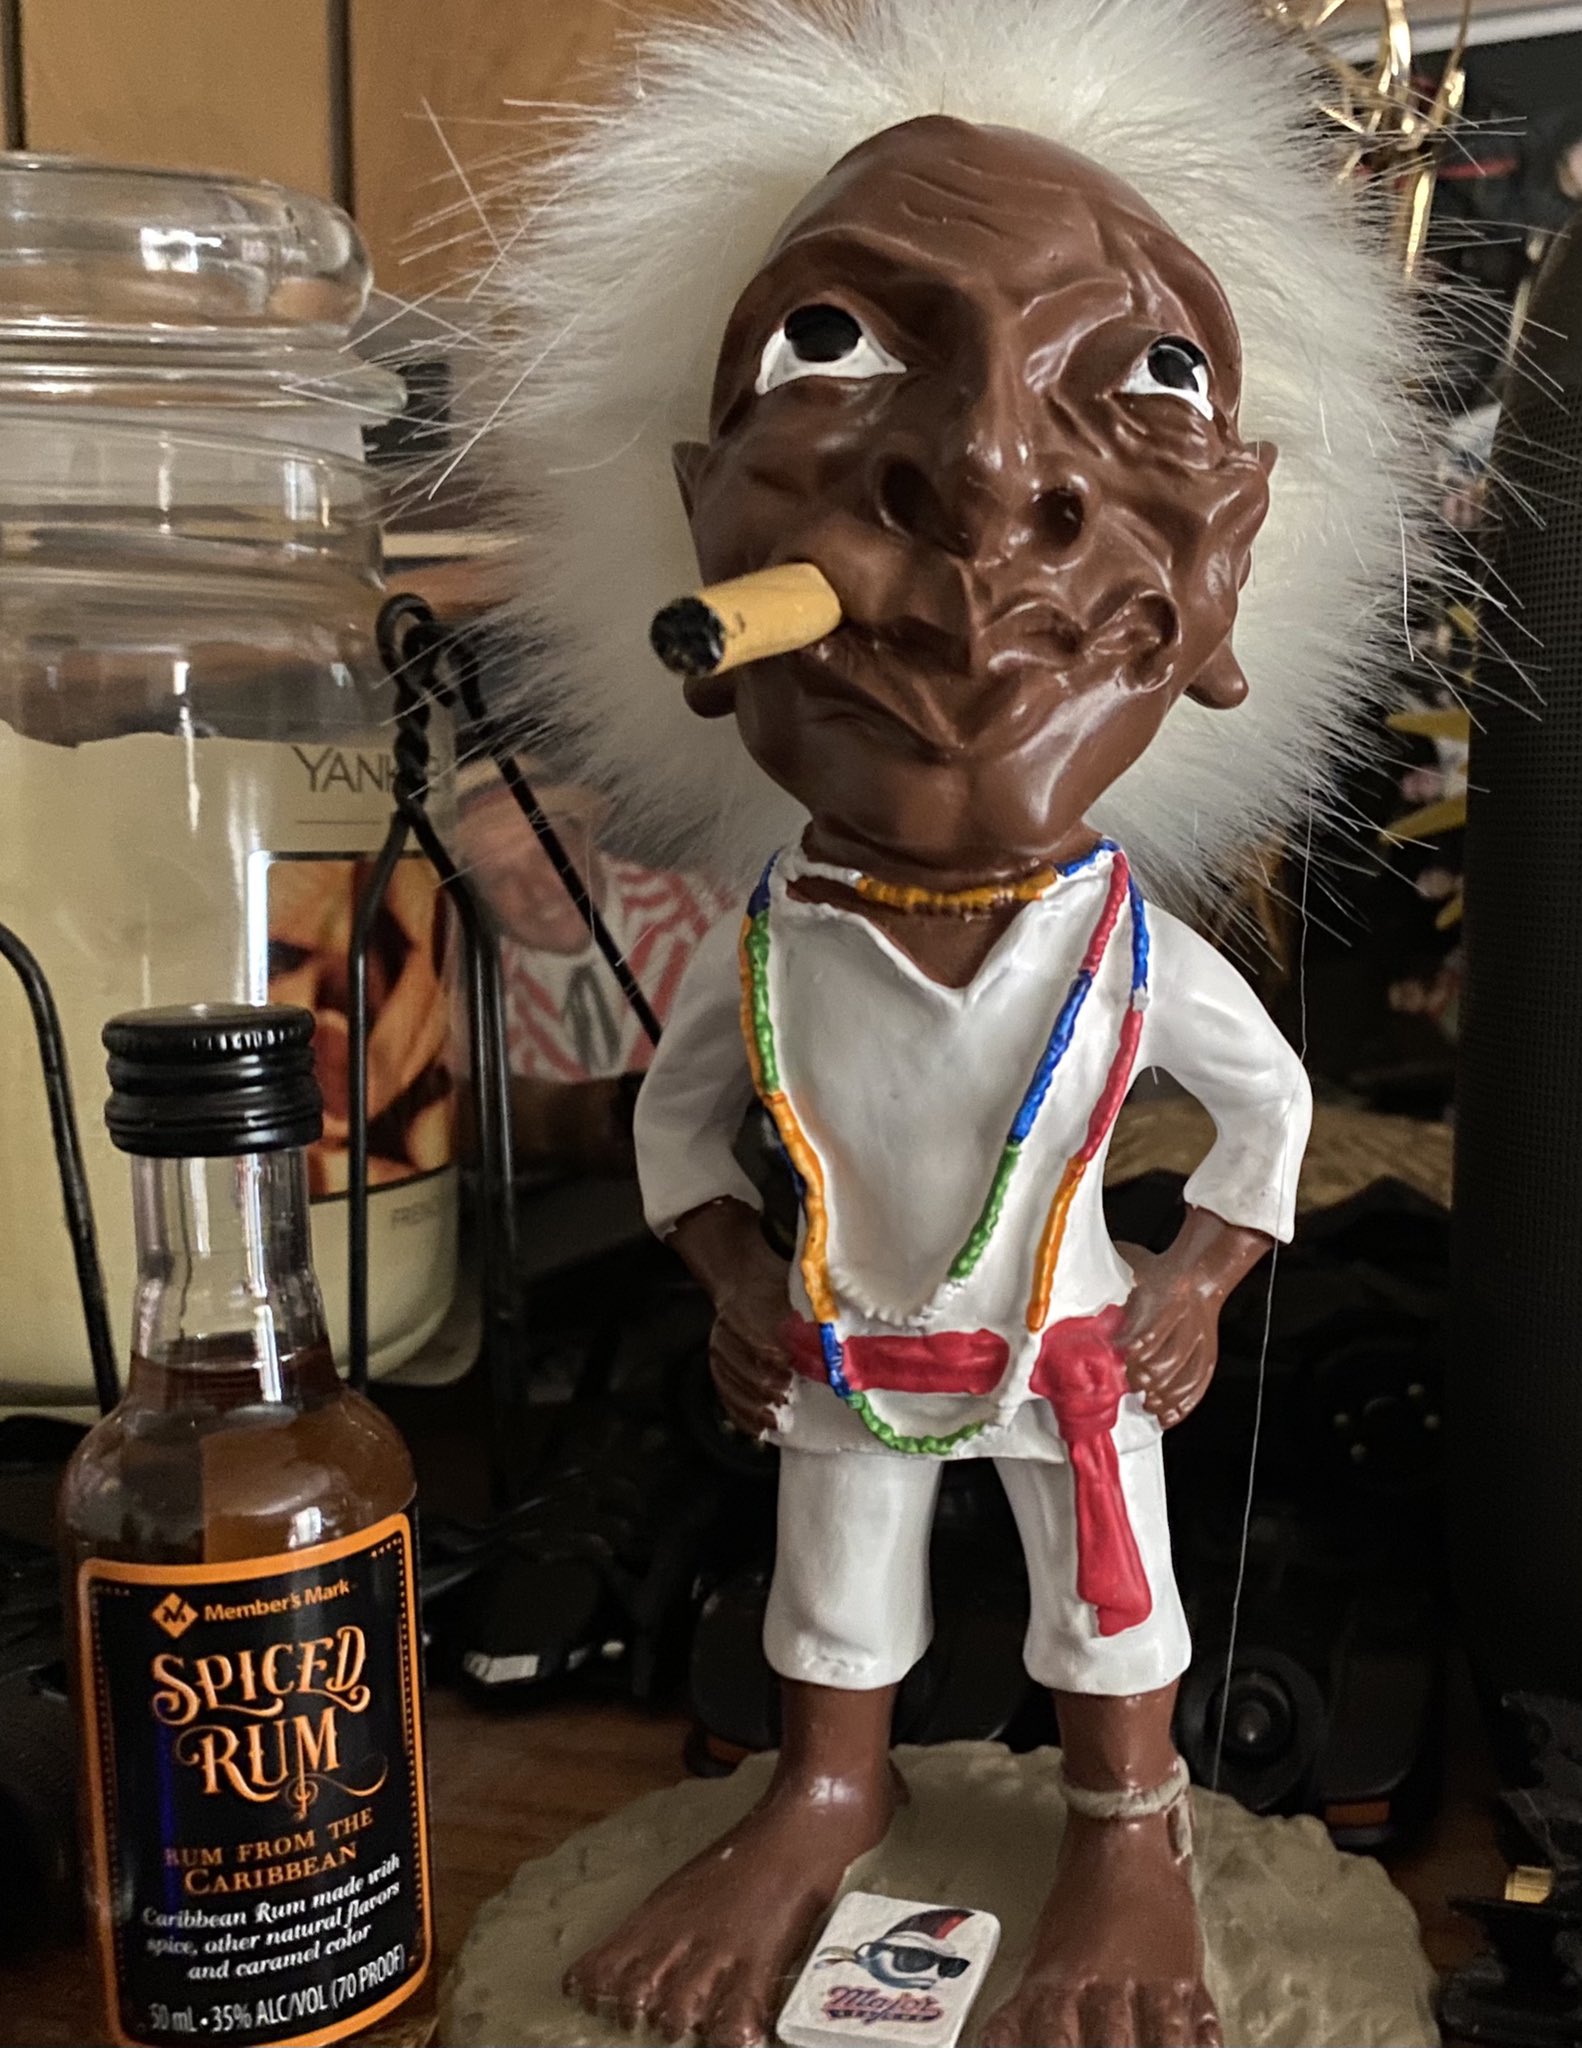 Kennie Bass on X: “Is very bad to steal Jobu's rum. Is very bad